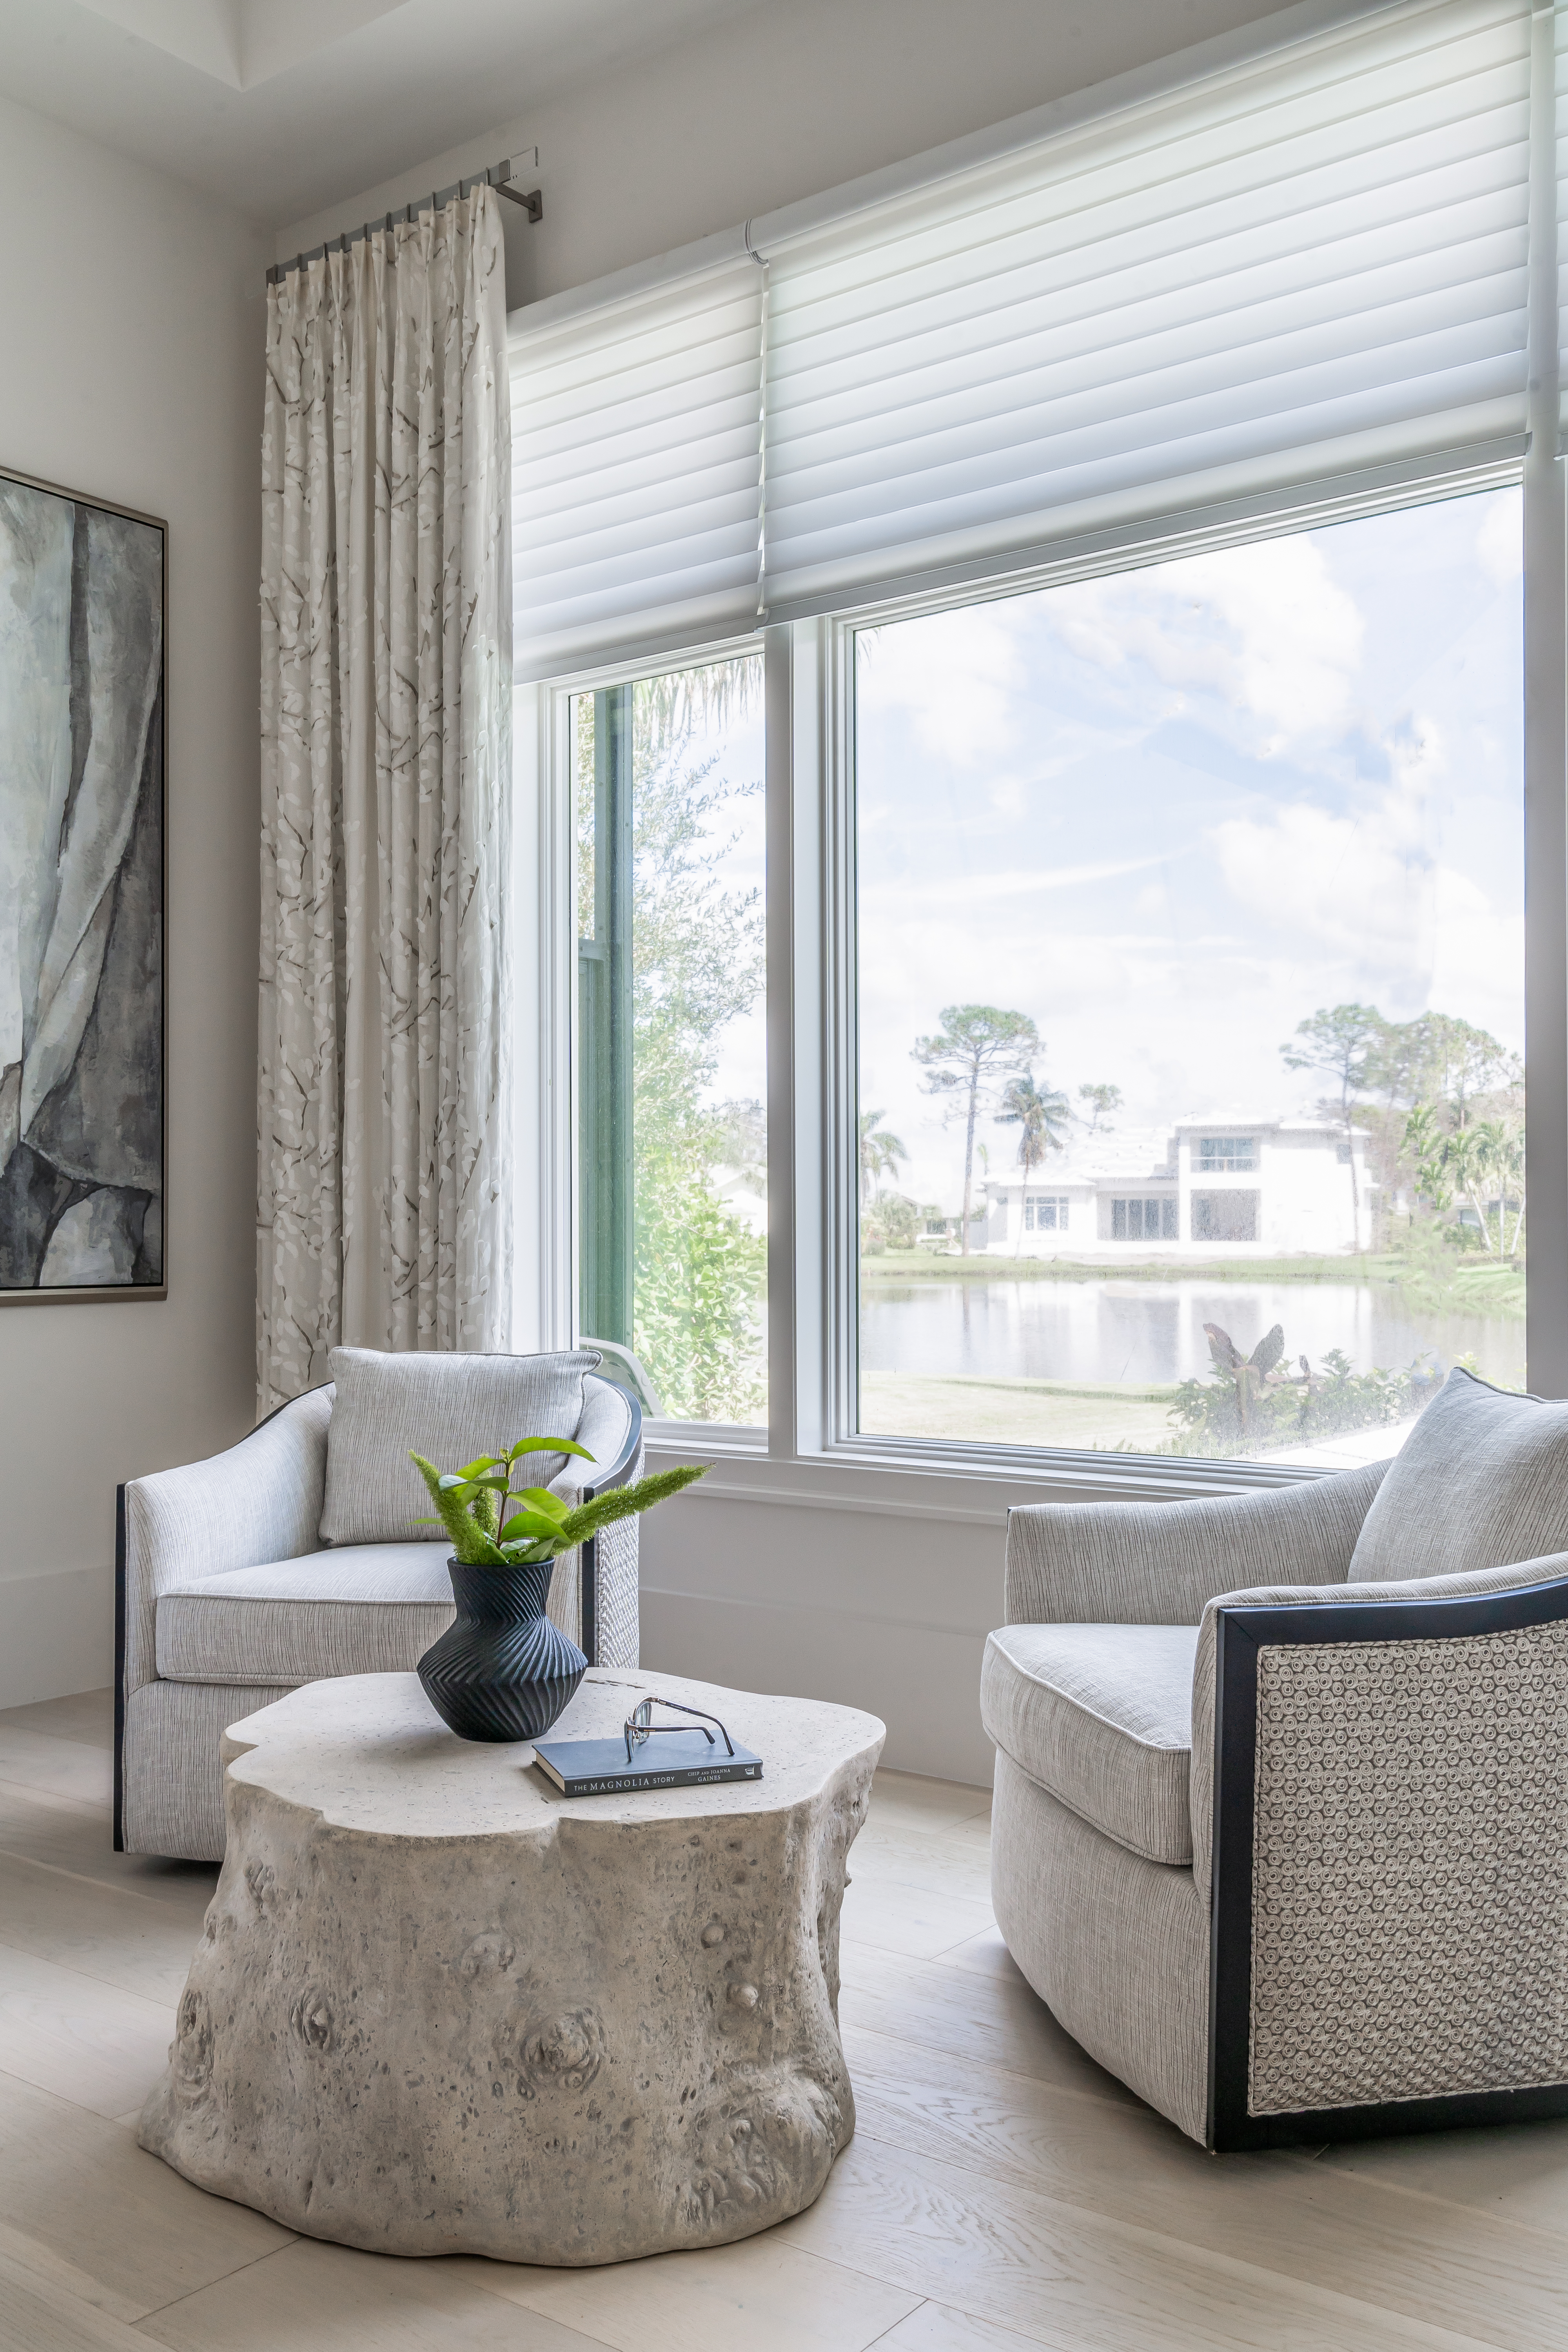 A coastal contemporary primary bedroom sitting area design with a neutral palette, designed by Florida interior designer Brooke Meyer of Gulfshore Interior Design